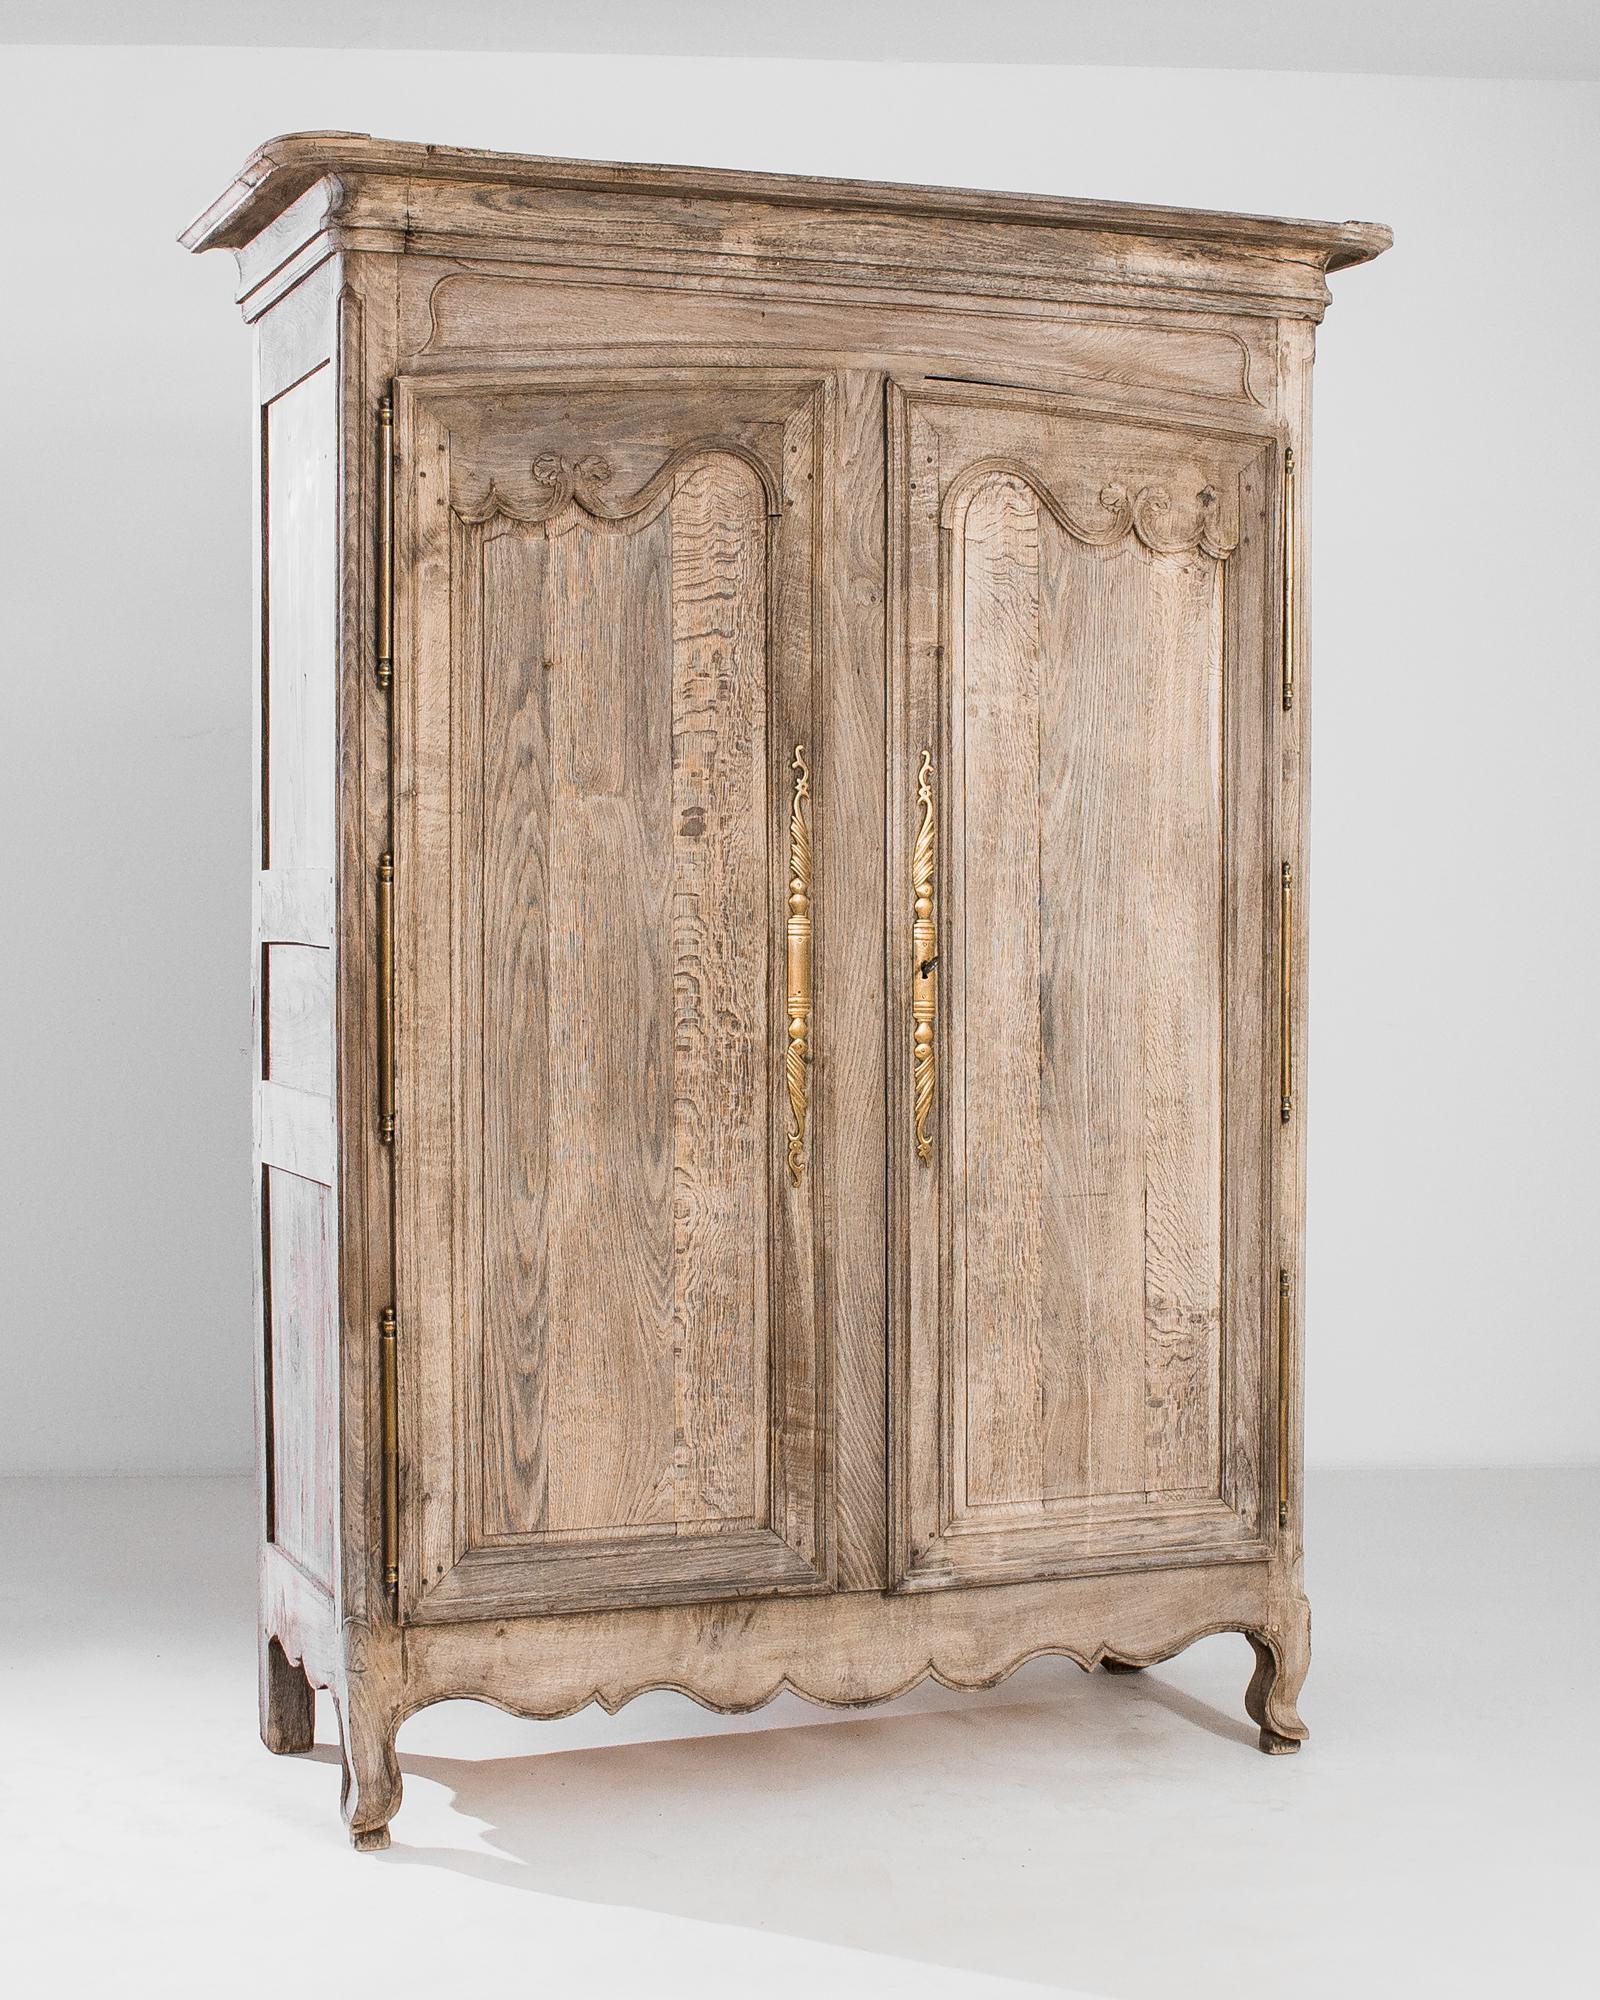 Romantic paneling and the subtle tone of the restored wood make this antique cabinet a Baroque beauty. Made in France in 1800, the fluid arches and leafy scrolls of the door panels are echoed in the the scalloped apron and graceful cabriole of the